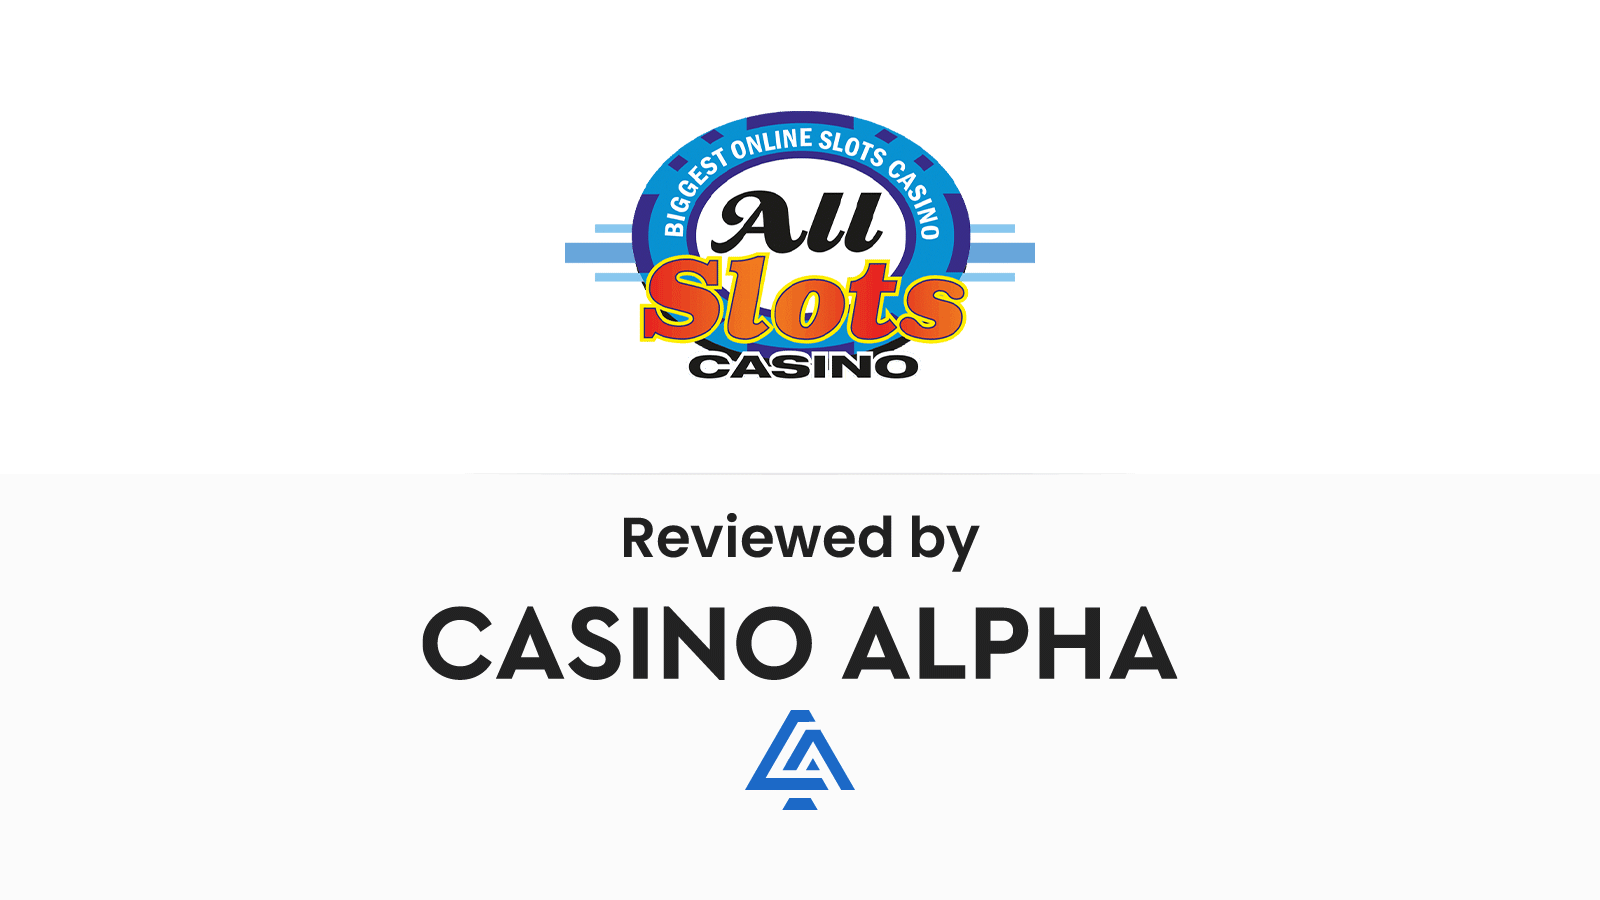 All Slots Casino Review & Promotions List